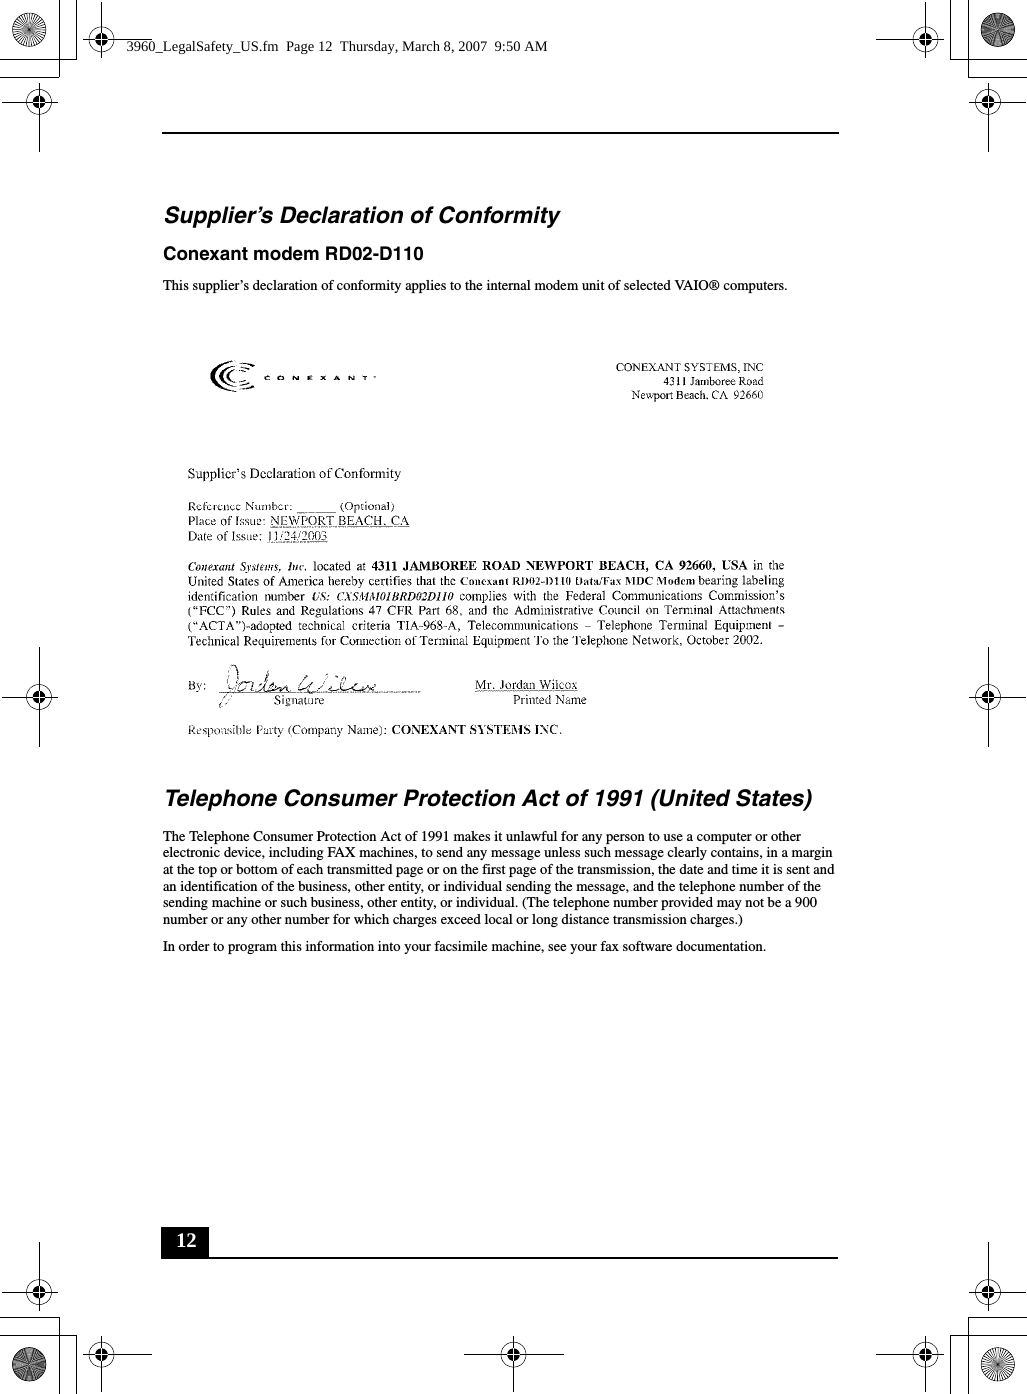 12Supplier’s Declaration of ConformityConexant modem RD02-D110This supplier’s declaration of conformity applies to the internal modem unit of selected VAIO® computers.Telephone Consumer Protection Act of 1991 (United States) The Telephone Consumer Protection Act of 1991 makes it unlawful for any person to use a computer or other electronic device, including FAX machines, to send any message unless such message clearly contains, in a margin at the top or bottom of each transmitted page or on the first page of the transmission, the date and time it is sent and an identification of the business, other entity, or individual sending the message, and the telephone number of the sending machine or such business, other entity, or individual. (The telephone number provided may not be a 900 number or any other number for which charges exceed local or long distance transmission charges.)In order to program this information into your facsimile machine, see your fax software documentation.3960_LegalSafety_US.fm  Page 12  Thursday, March 8, 2007  9:50 AM